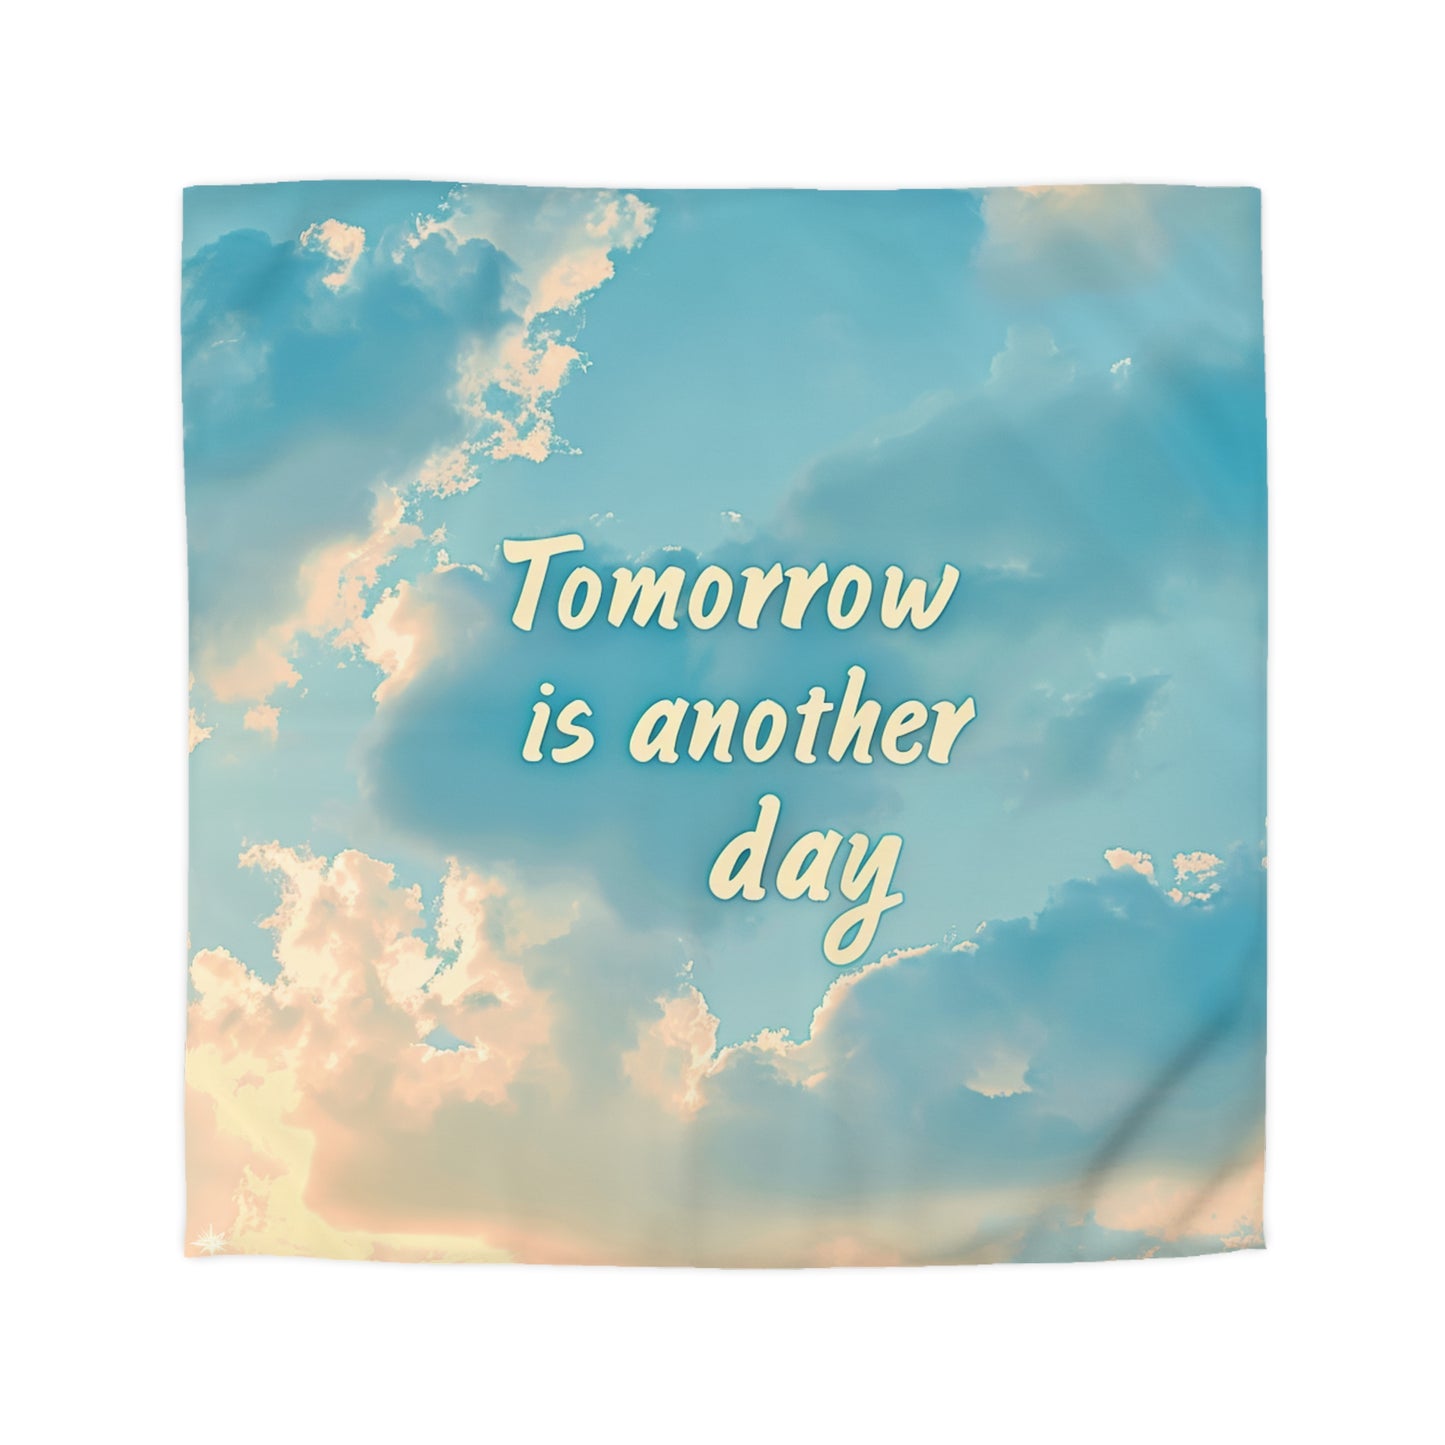 Microfiber Duvet Cover - Tomorrow is another day